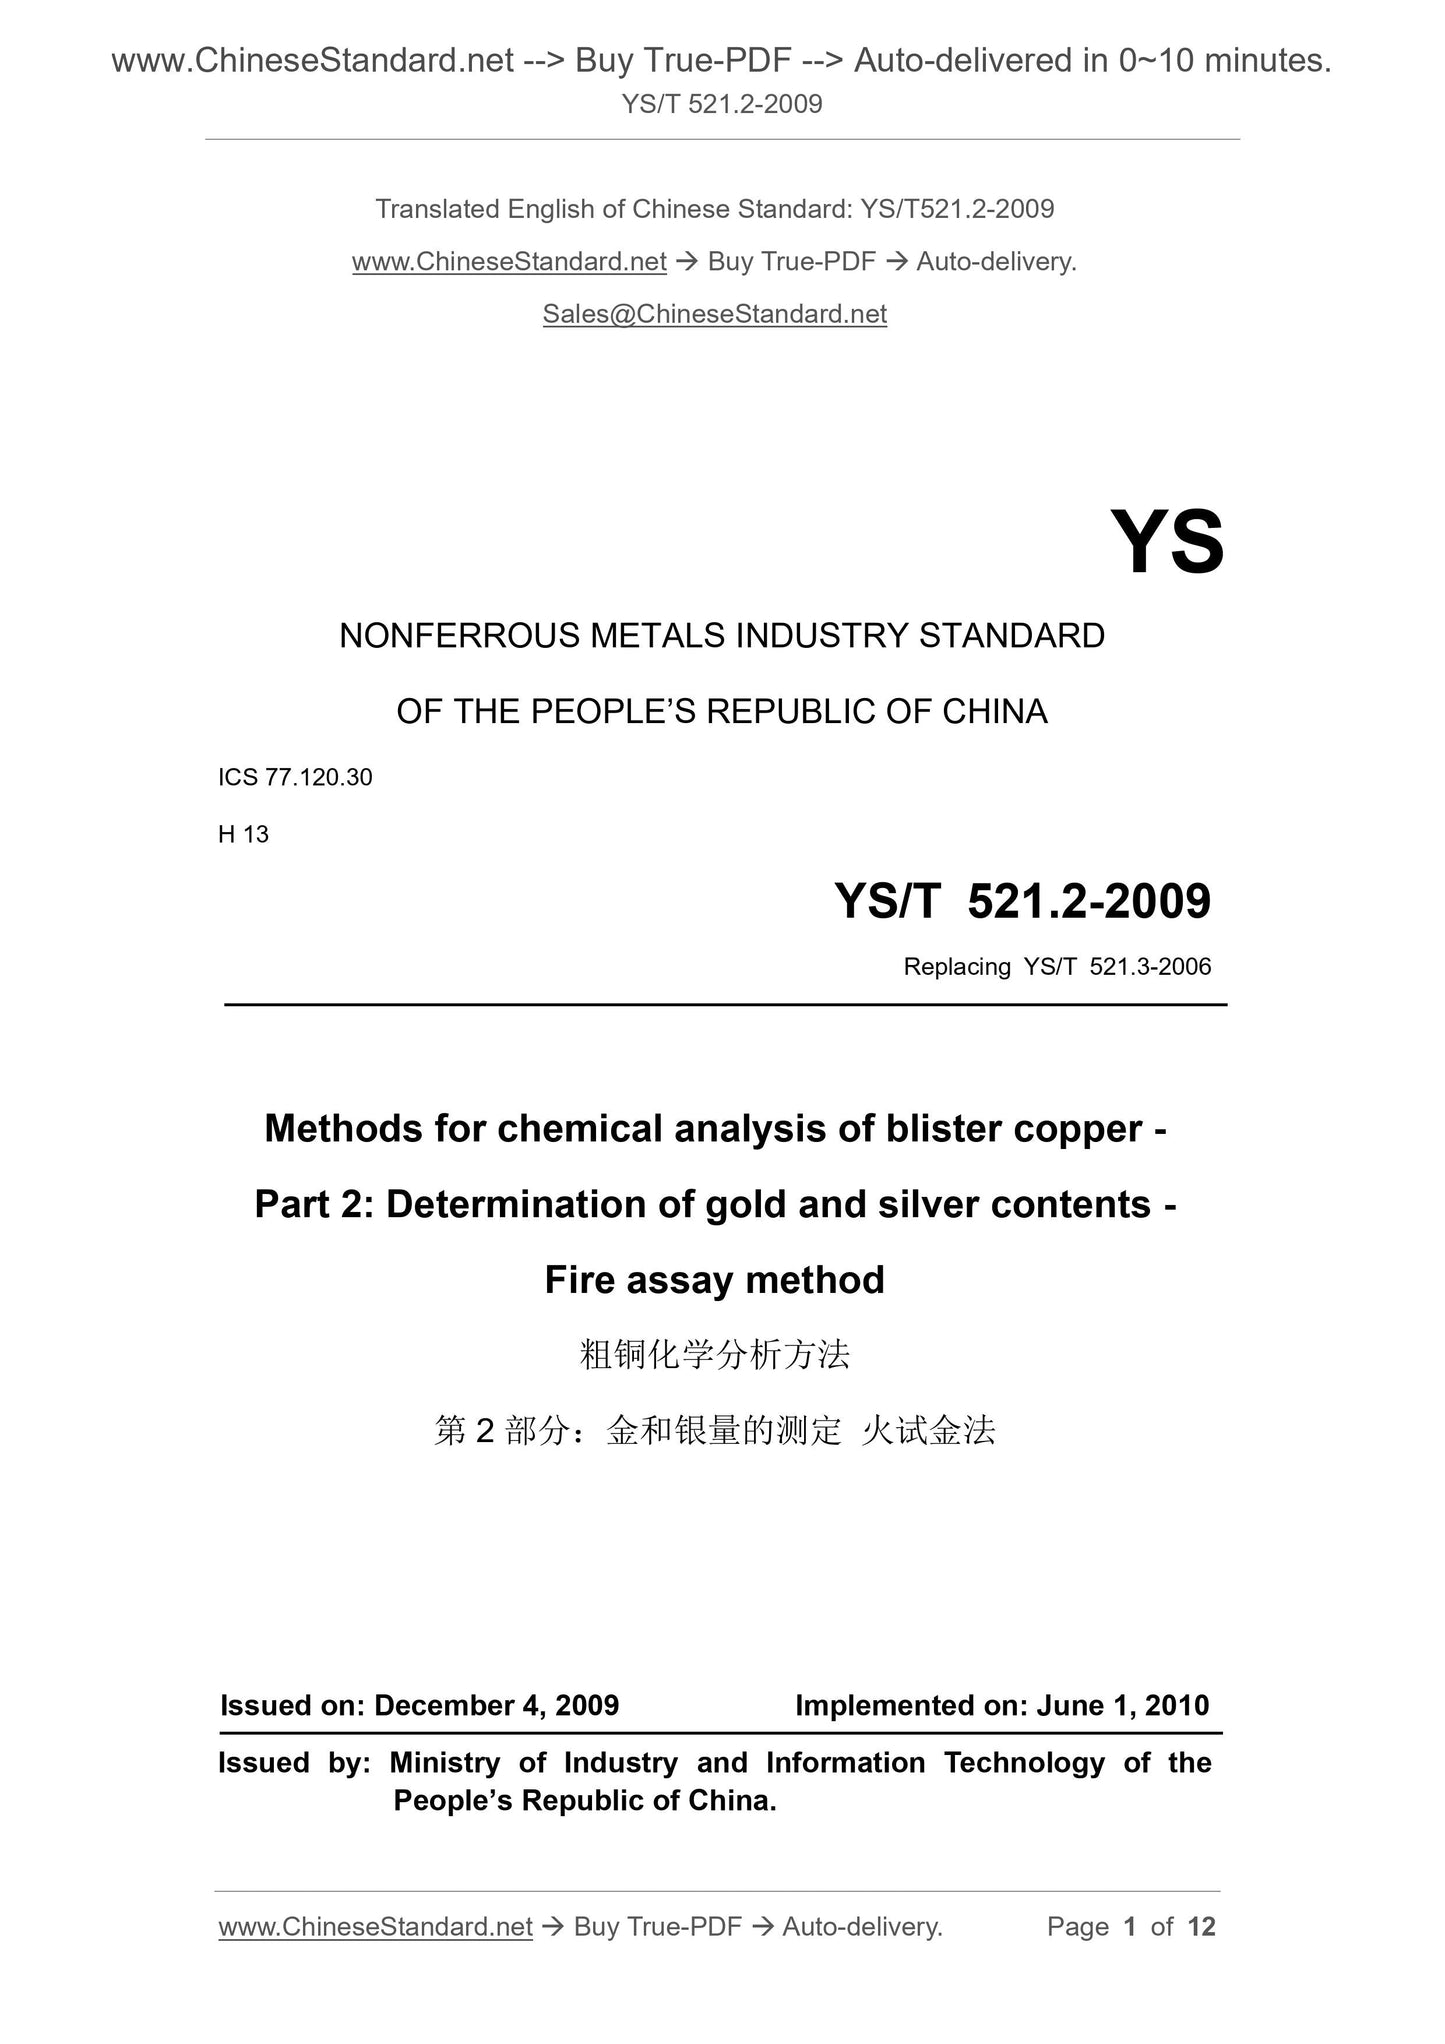 YS/T 521.2-2009 Page 1